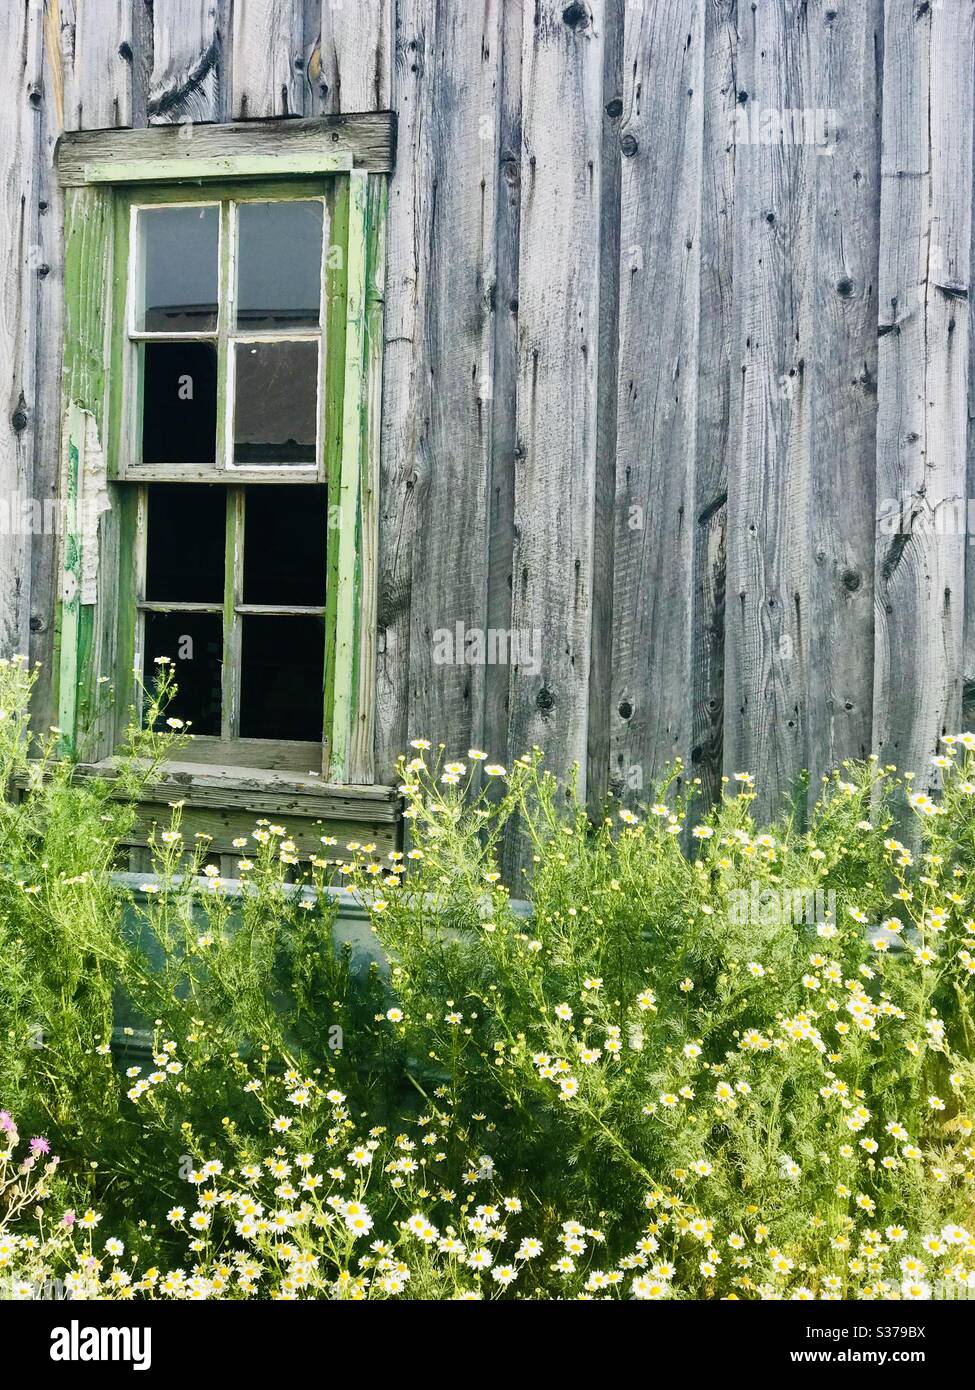 A green painted window sill on a rustic wooden cabin surrounded by wild flowers. Stock Photo